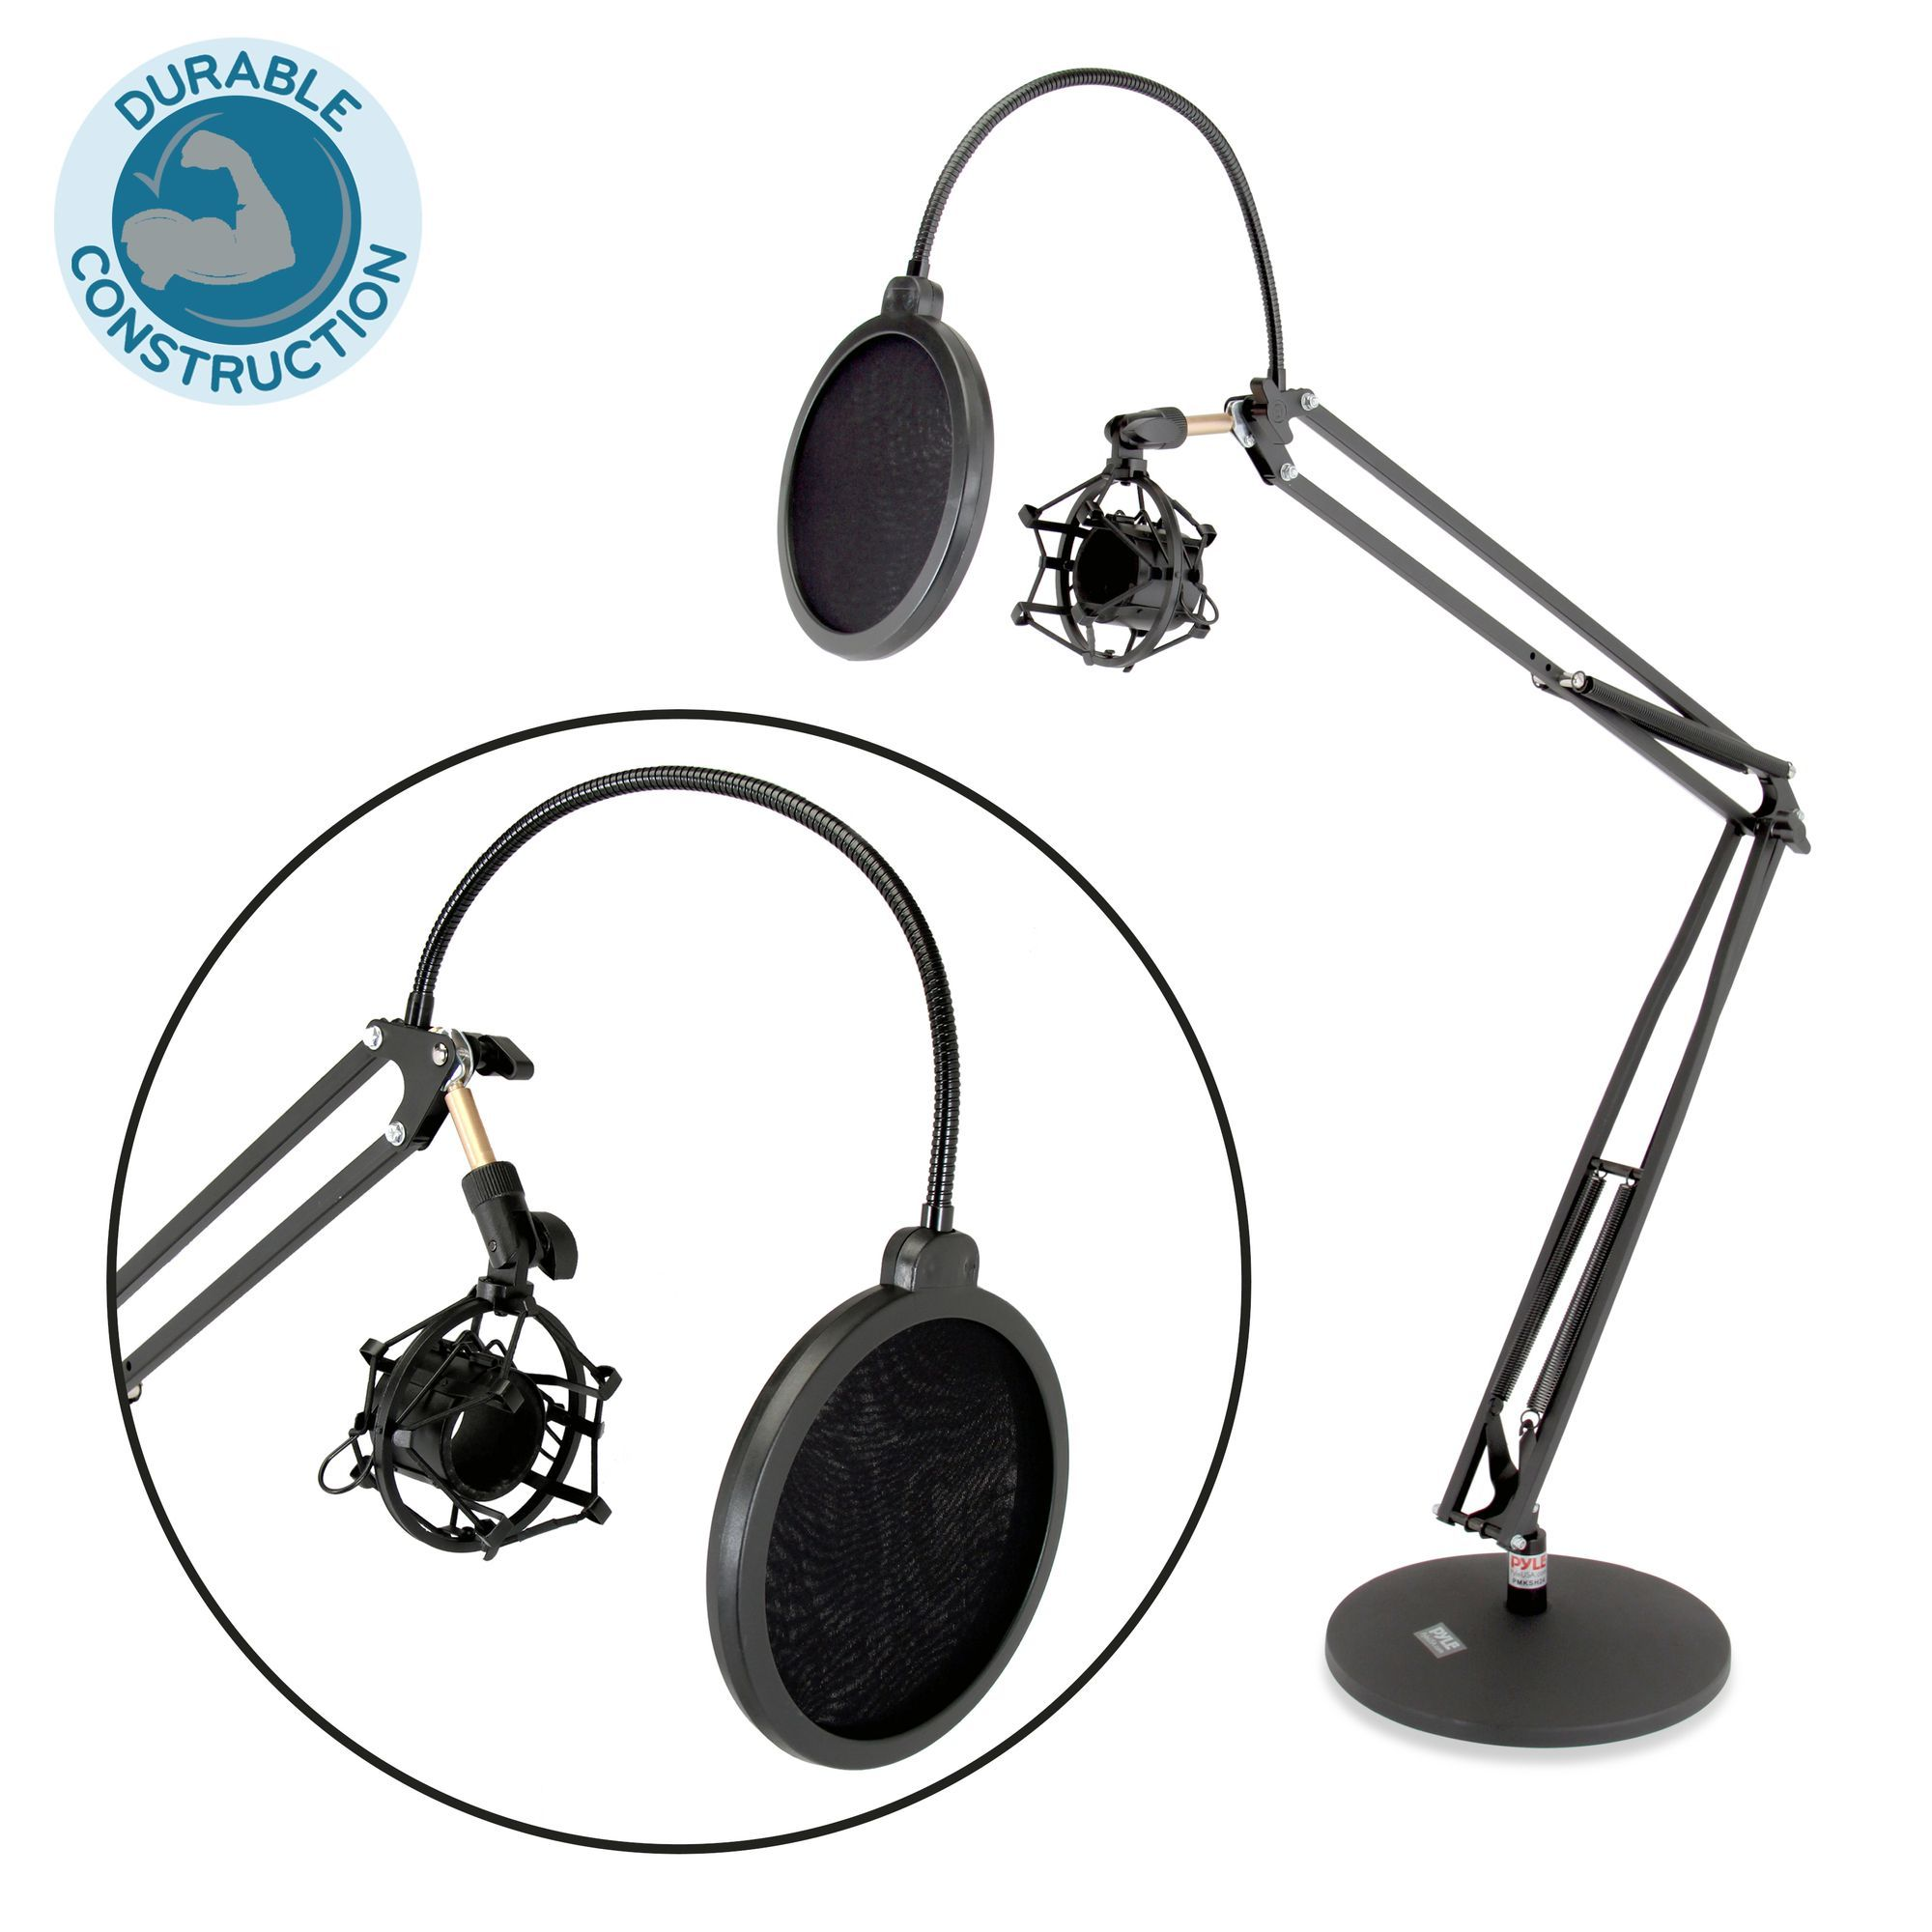 Pyle Microphone Suspension Boom Stand, Built-In Pop Filter, (PMKSH24)